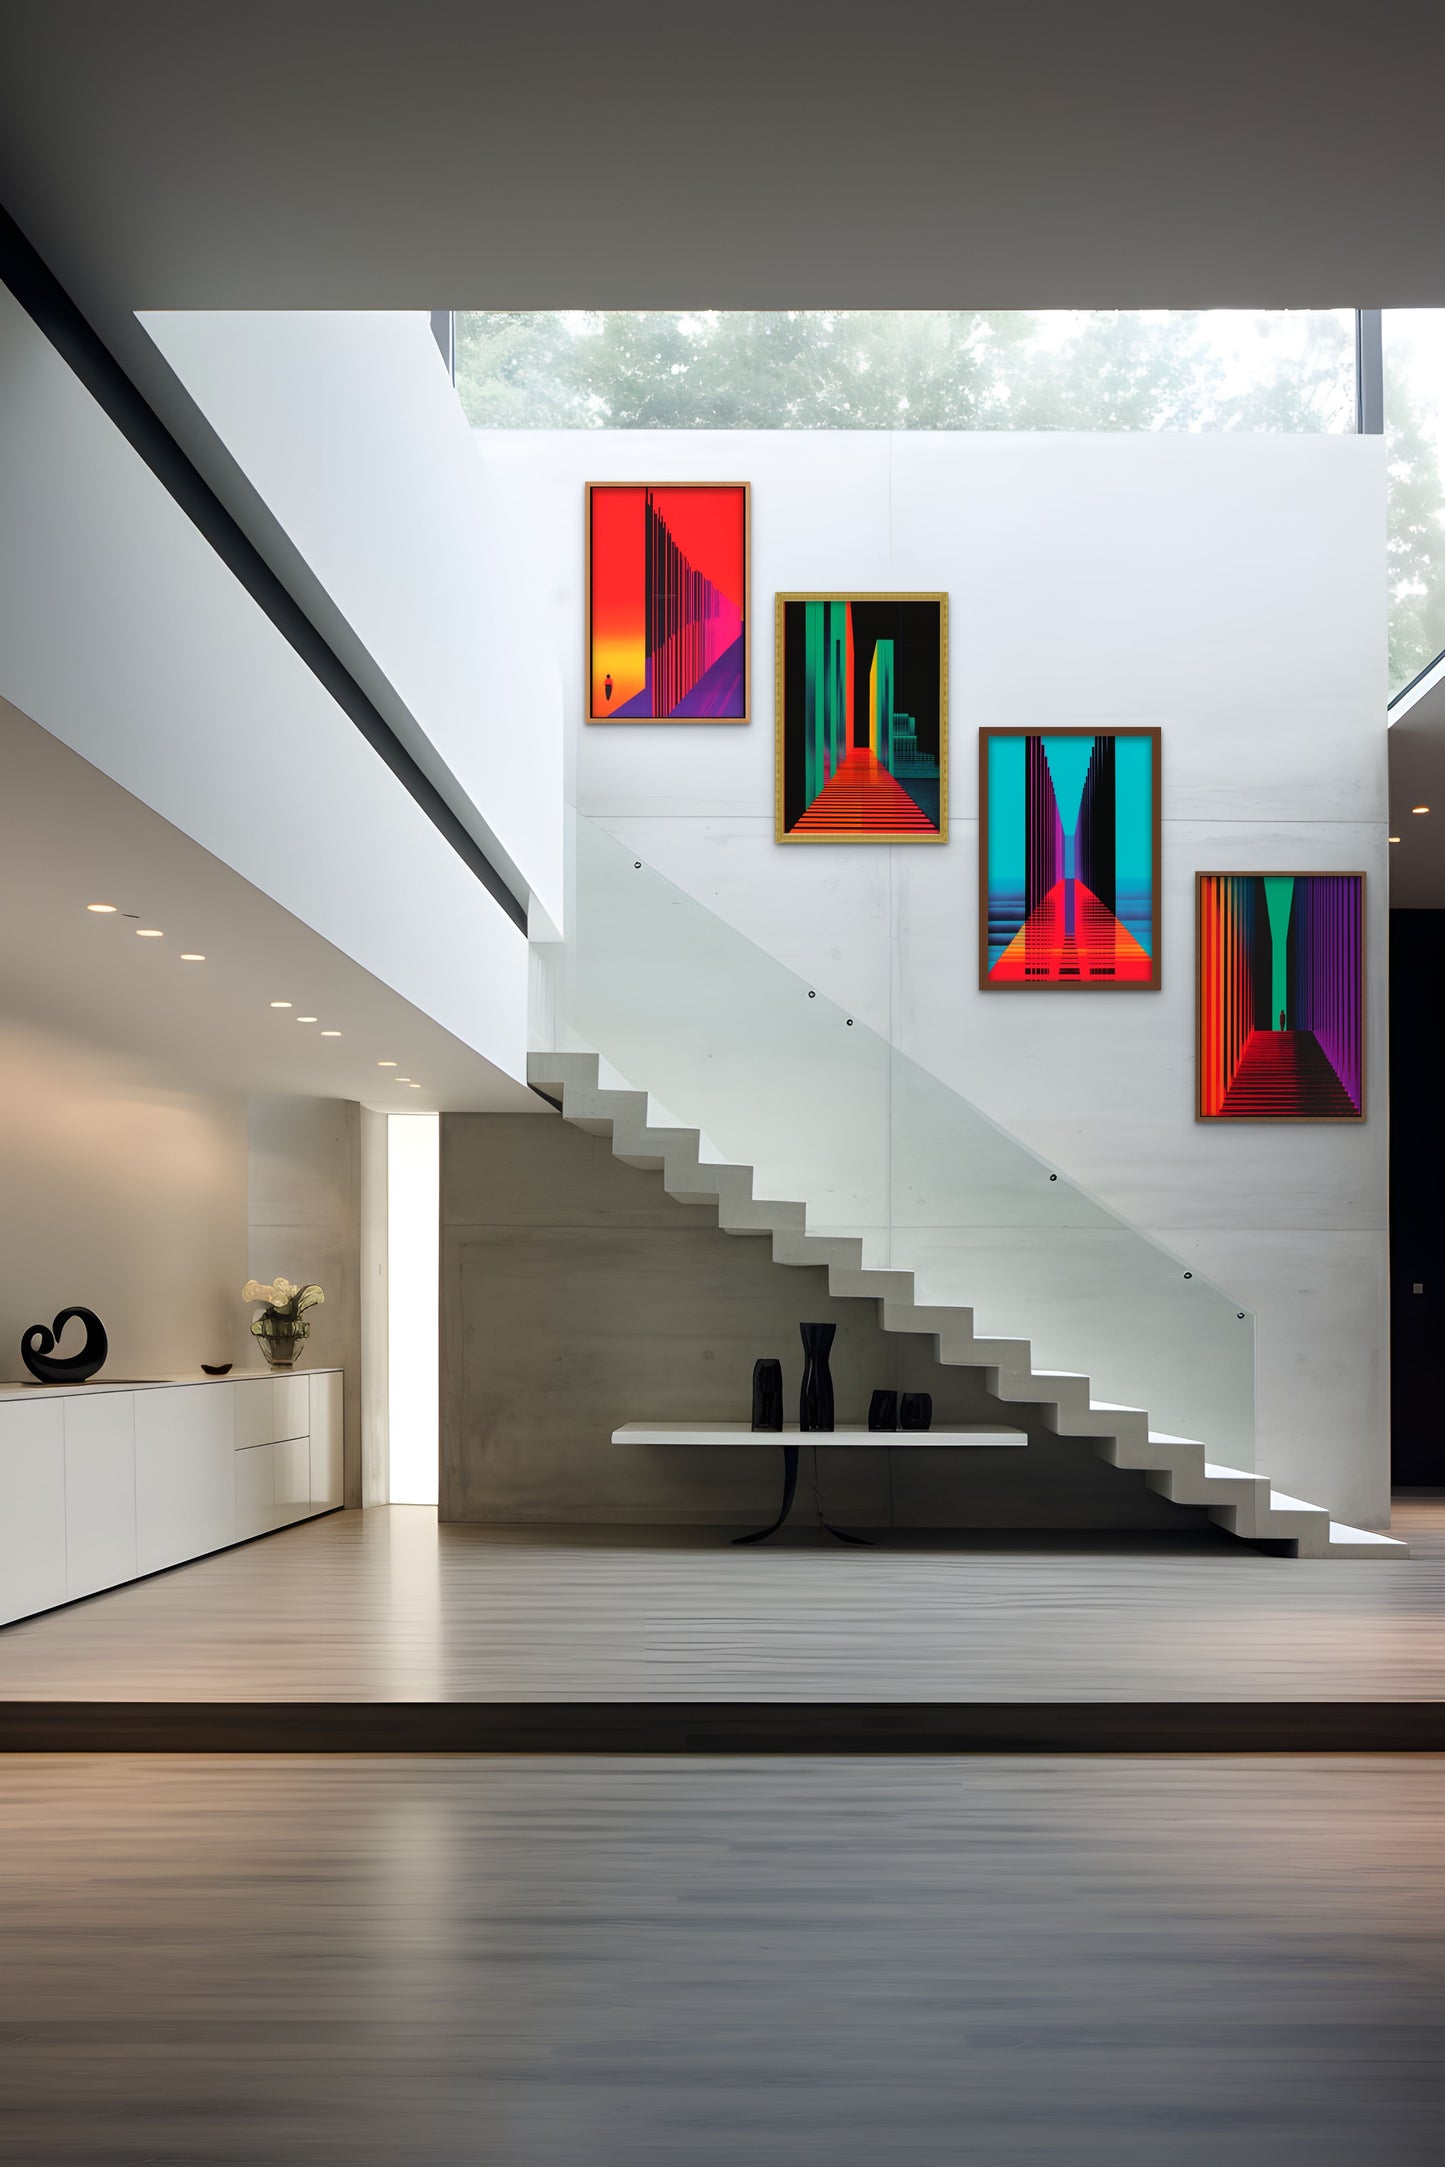 A modern staircase in a minimalist interior with colorful artwork on the wall.